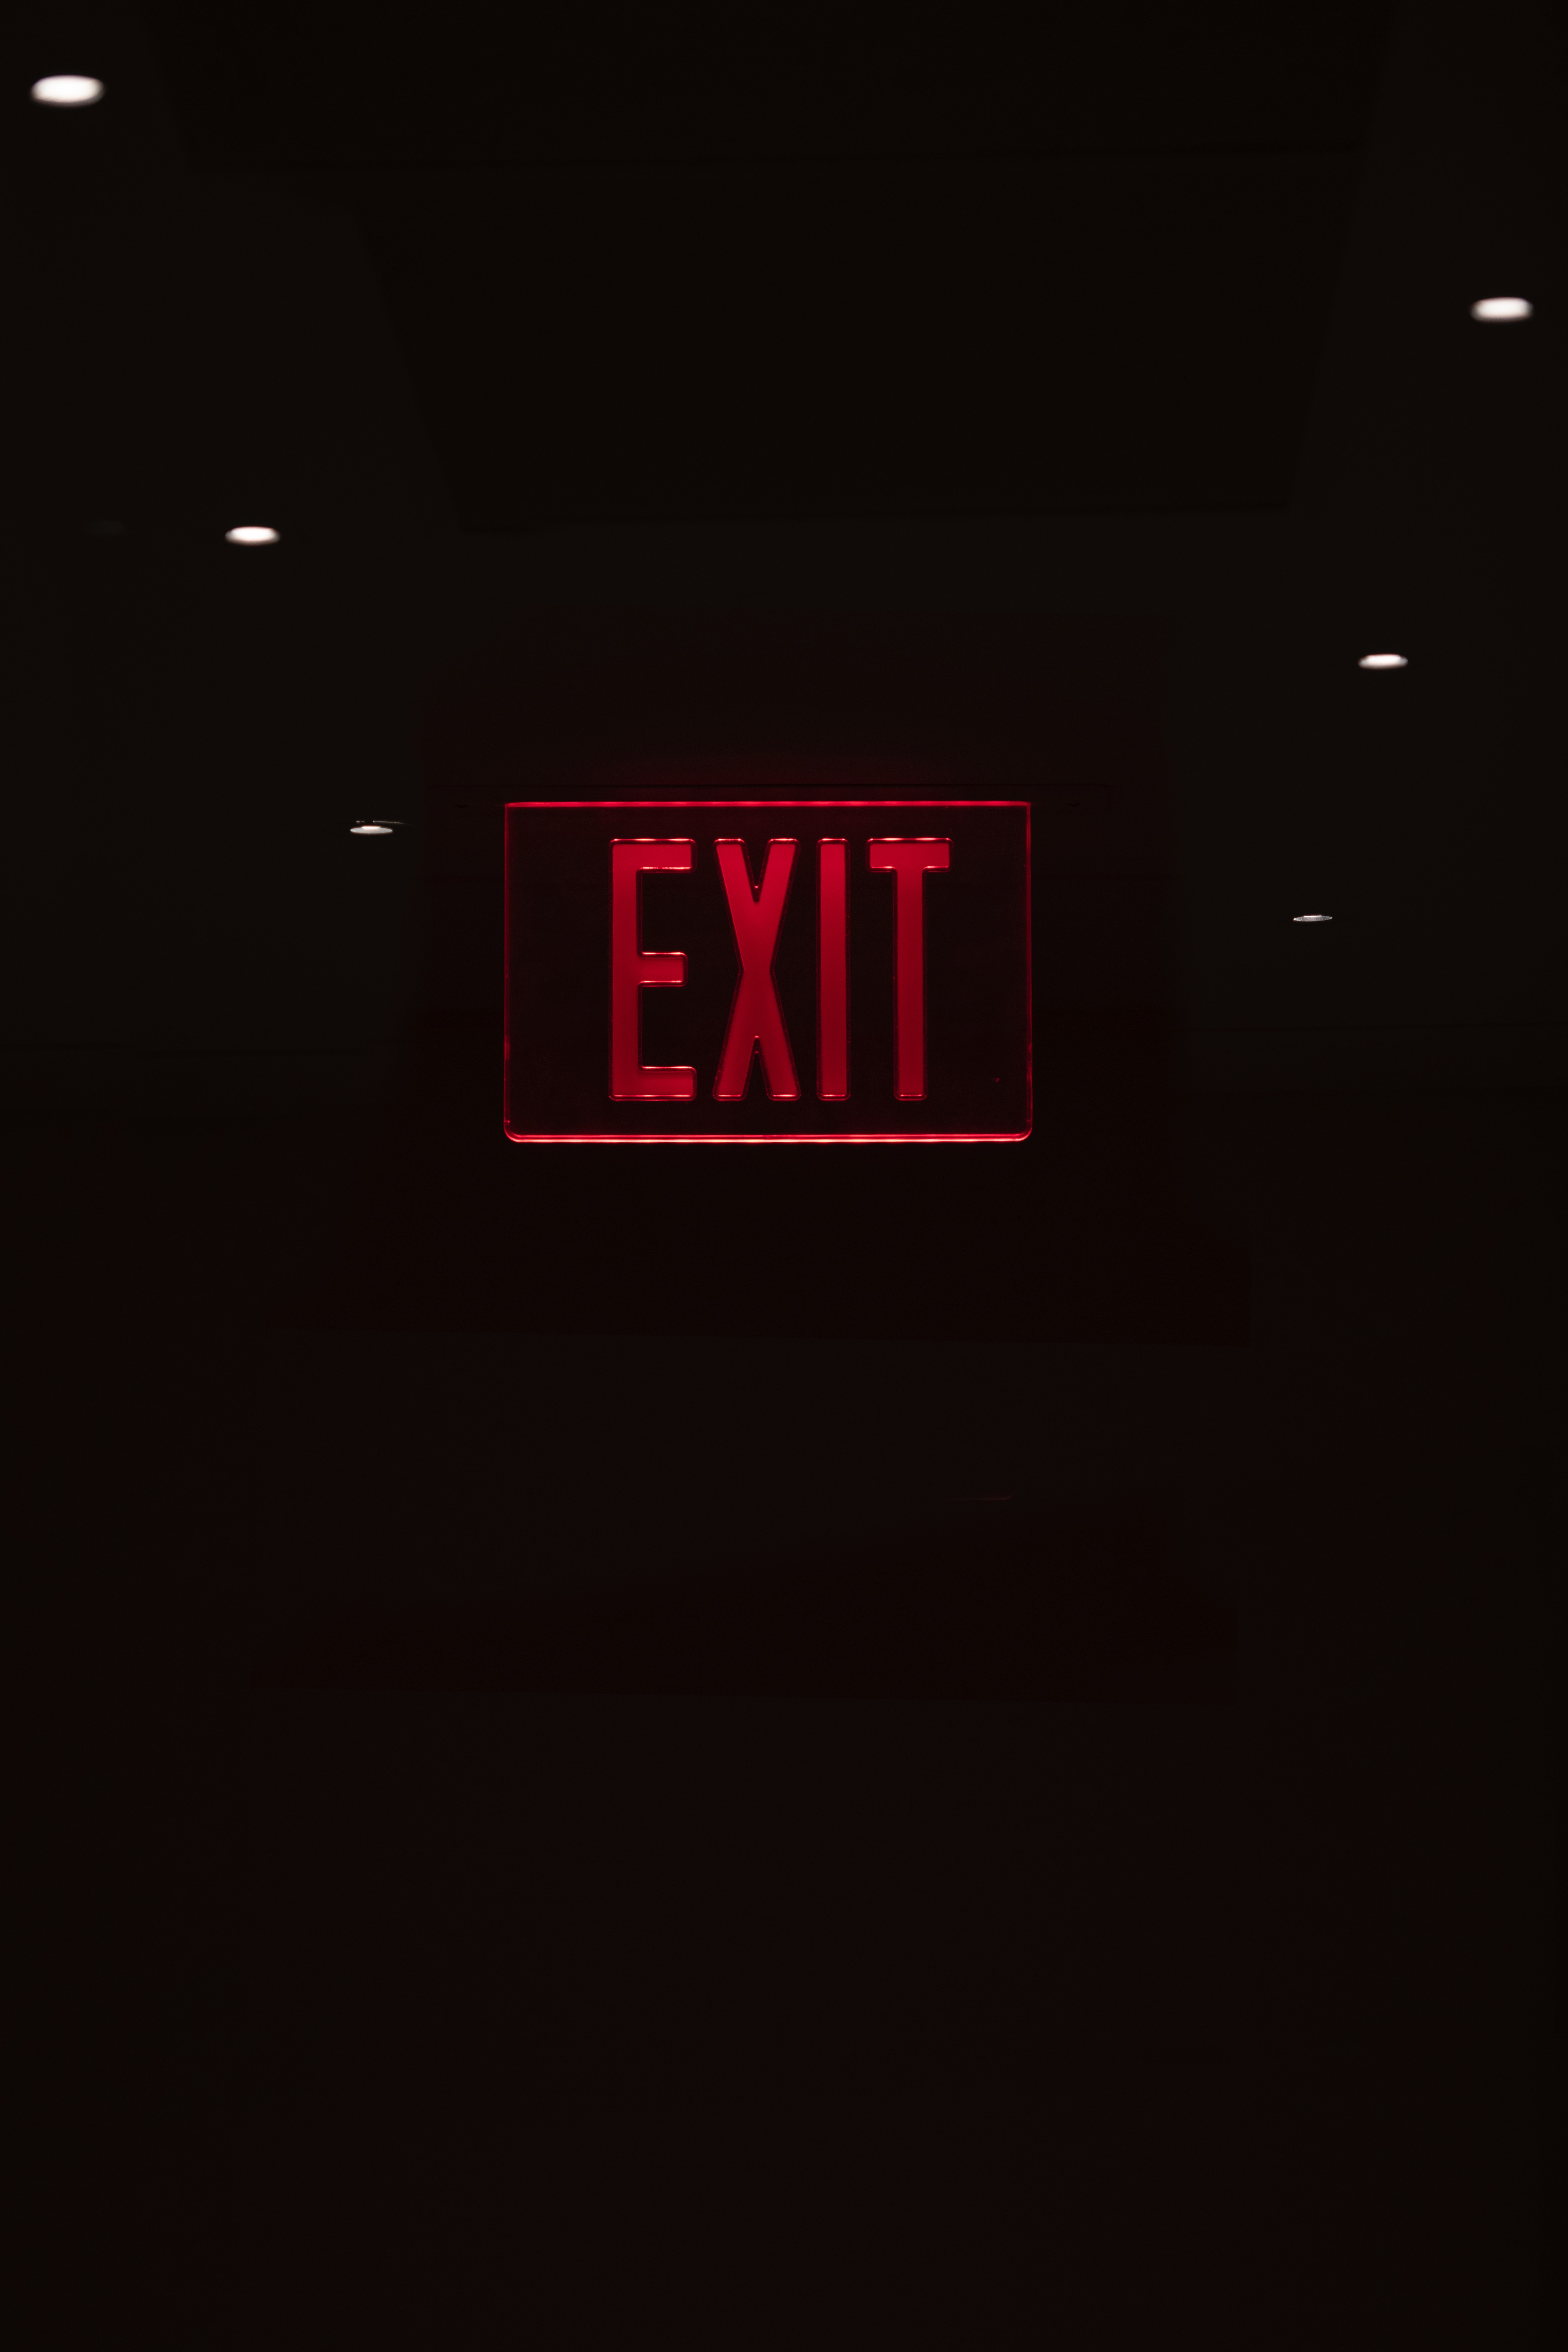 plate, nameplate, dark, red, words, inscription, exit